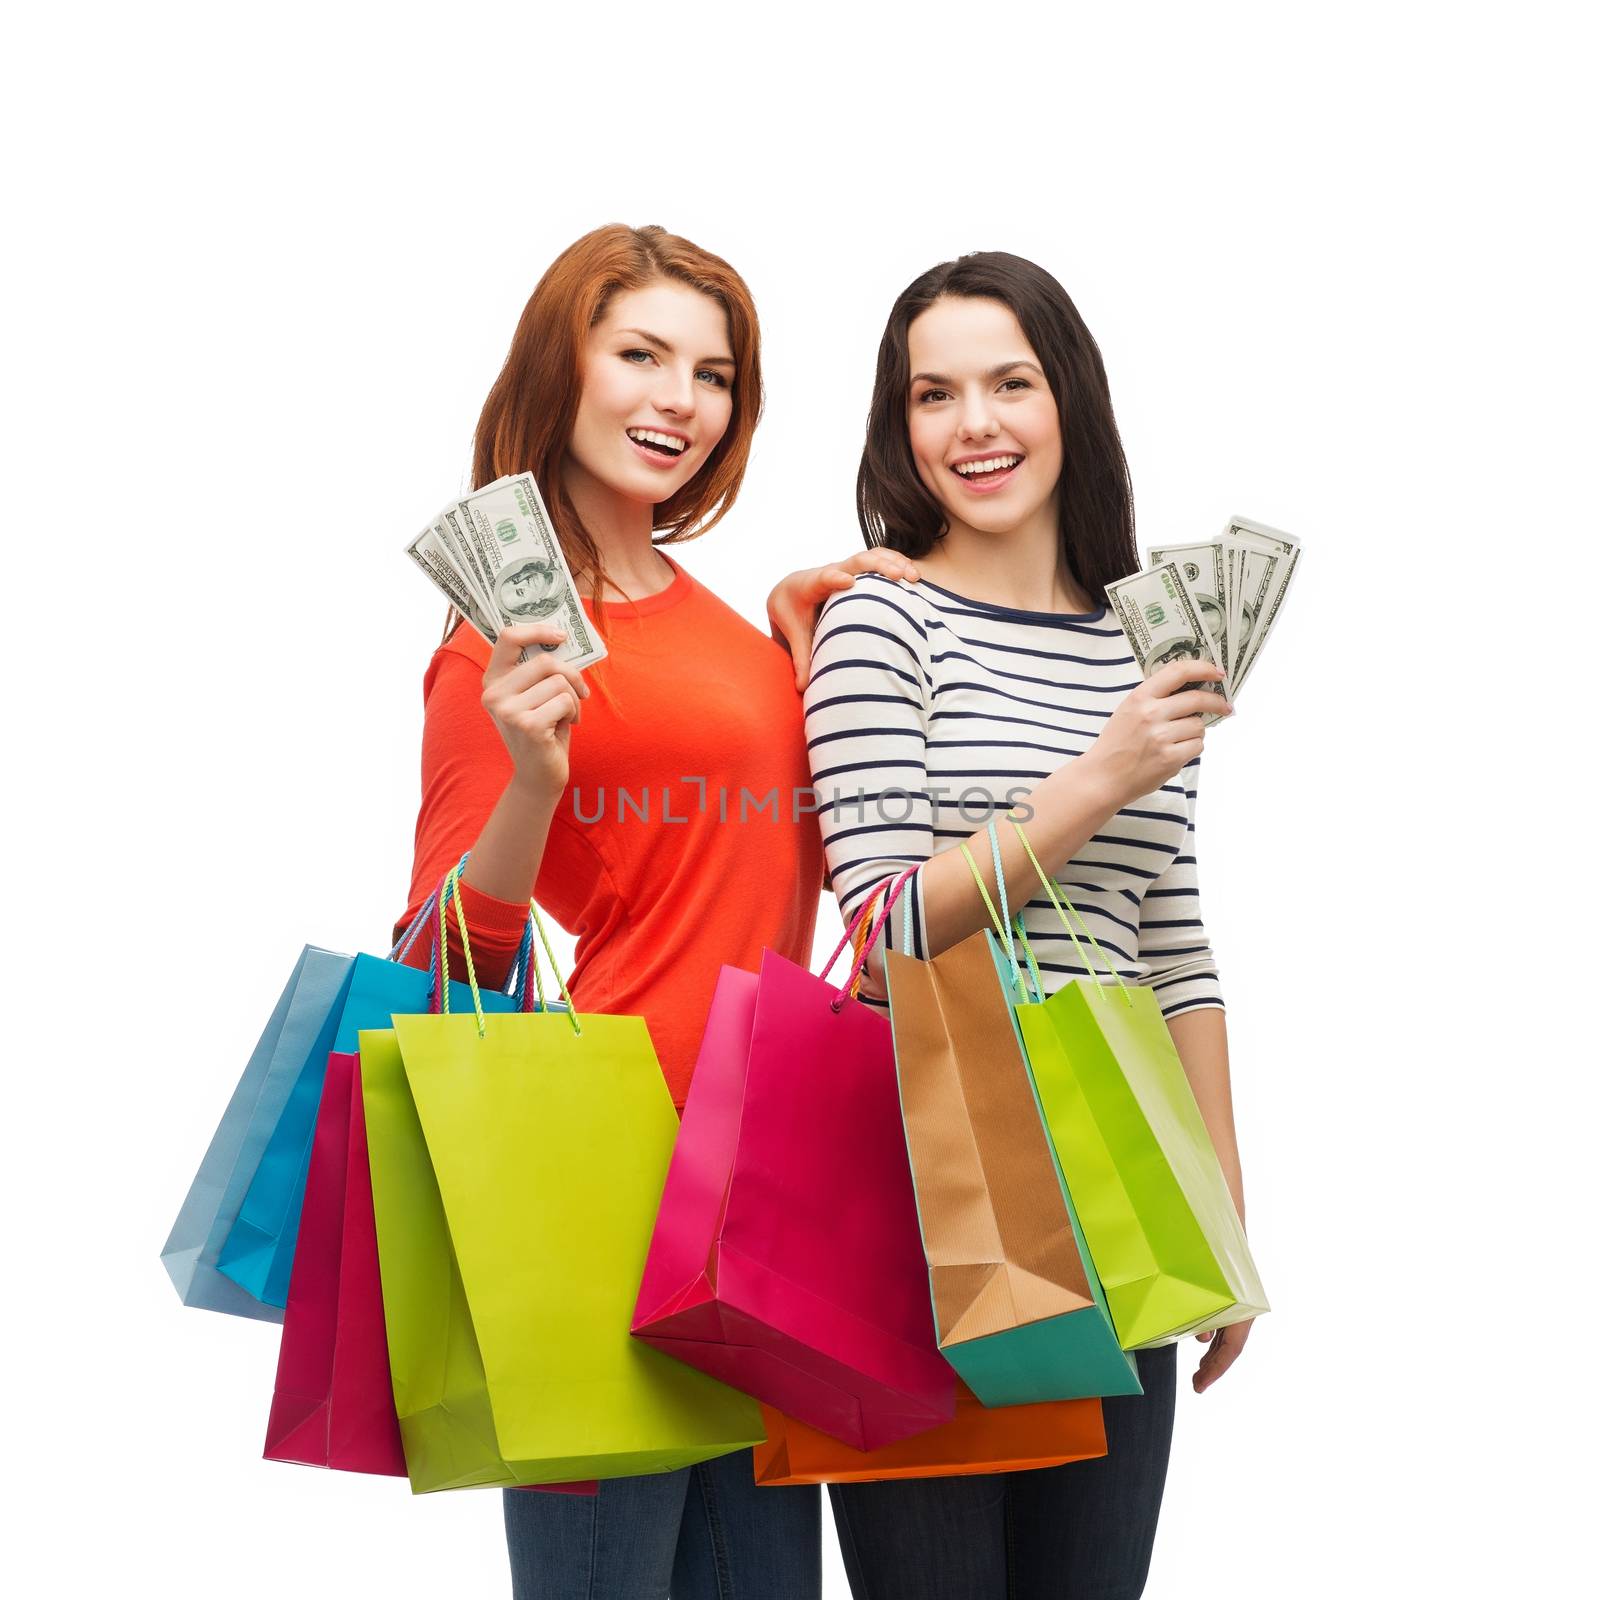 smiling teenage girls with shopping bags and money by dolgachov